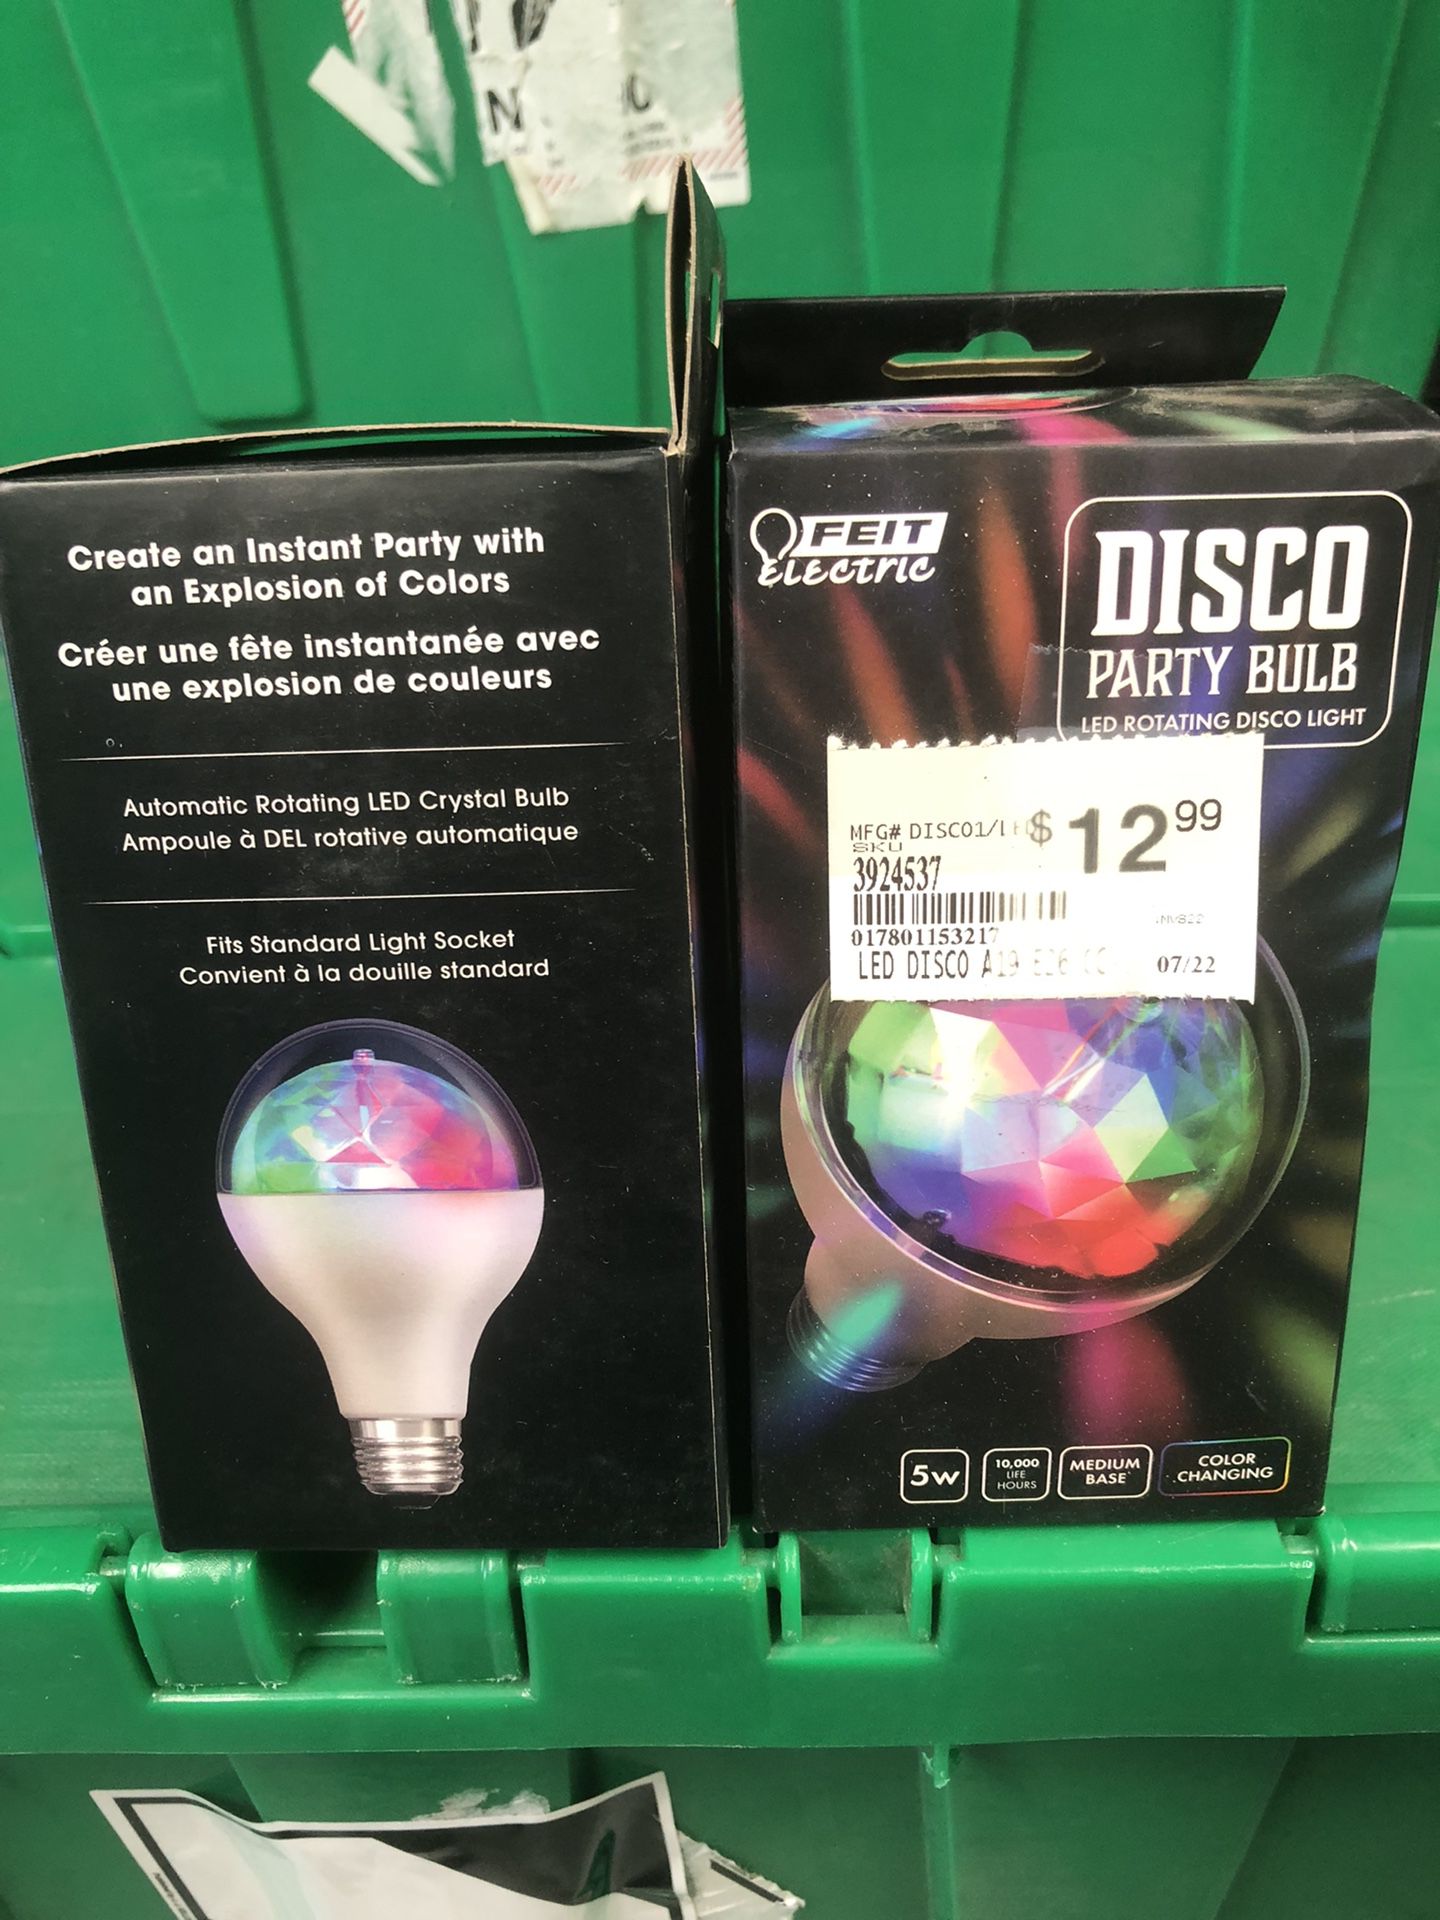 NIB Feit Electric Disco Party Bulb. 2 Available $5 Each . You Must Pickup 